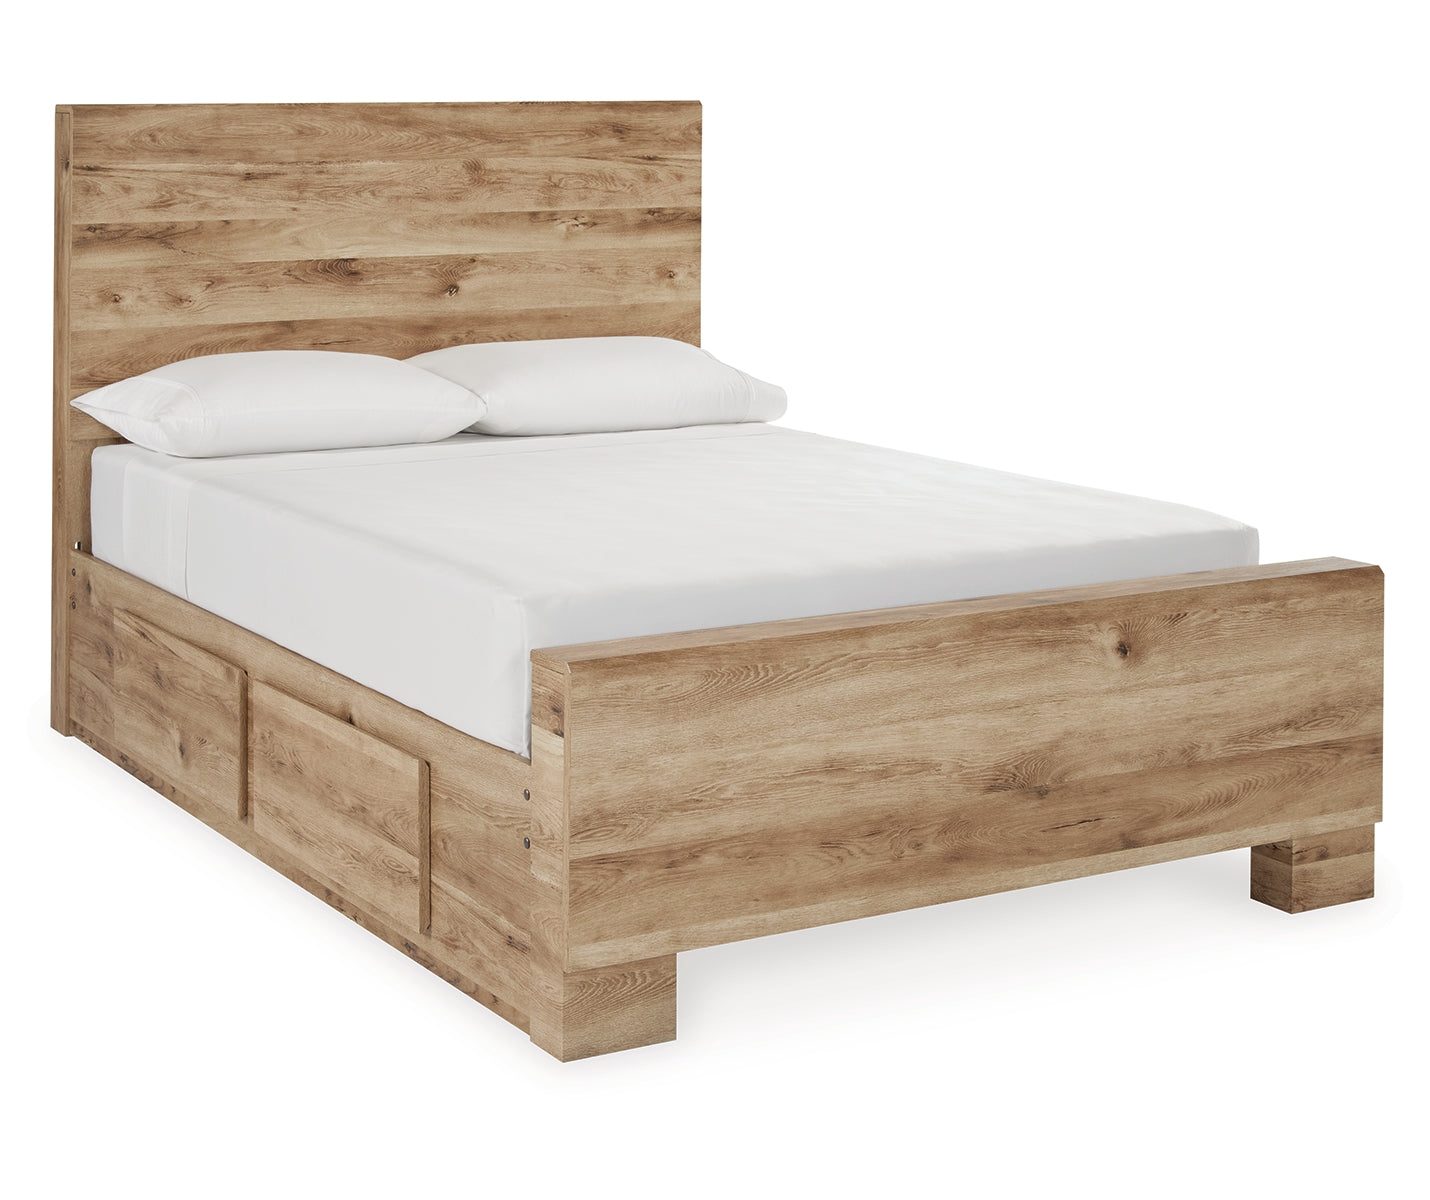 Hyanna Full Panel Bed with 2 Side Storage